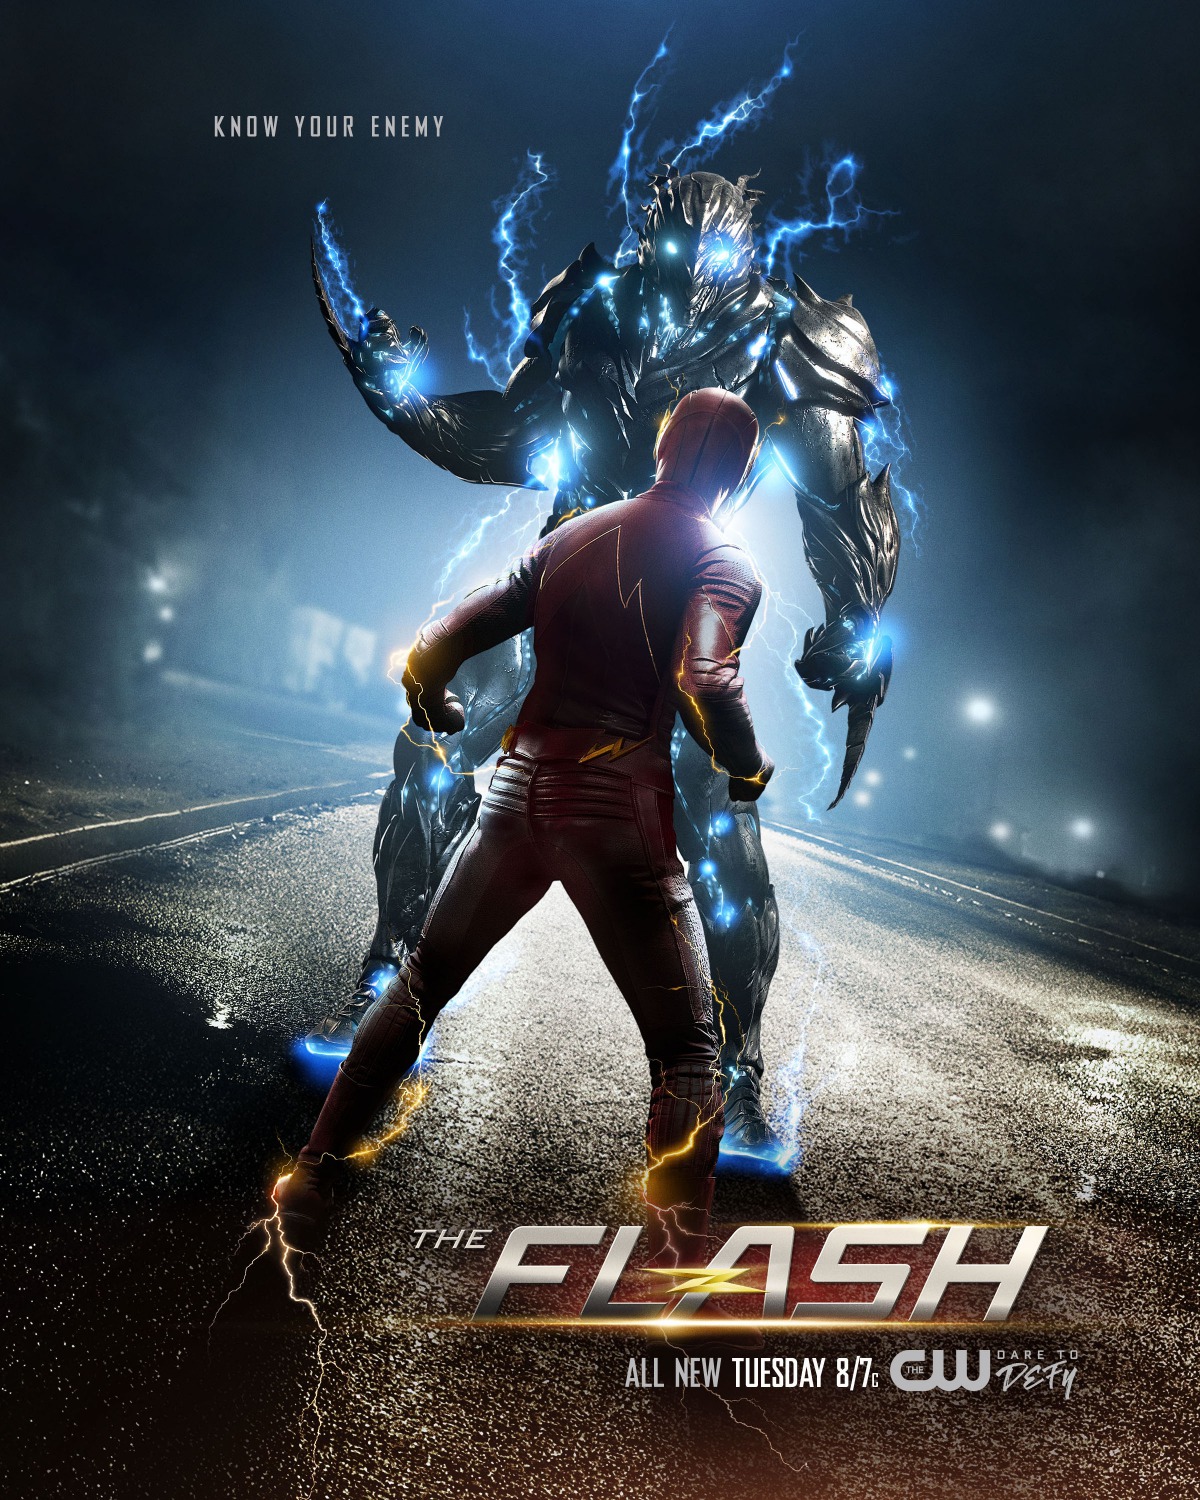 Extra Large Movie Poster Image for The Flash (#19 of 54)